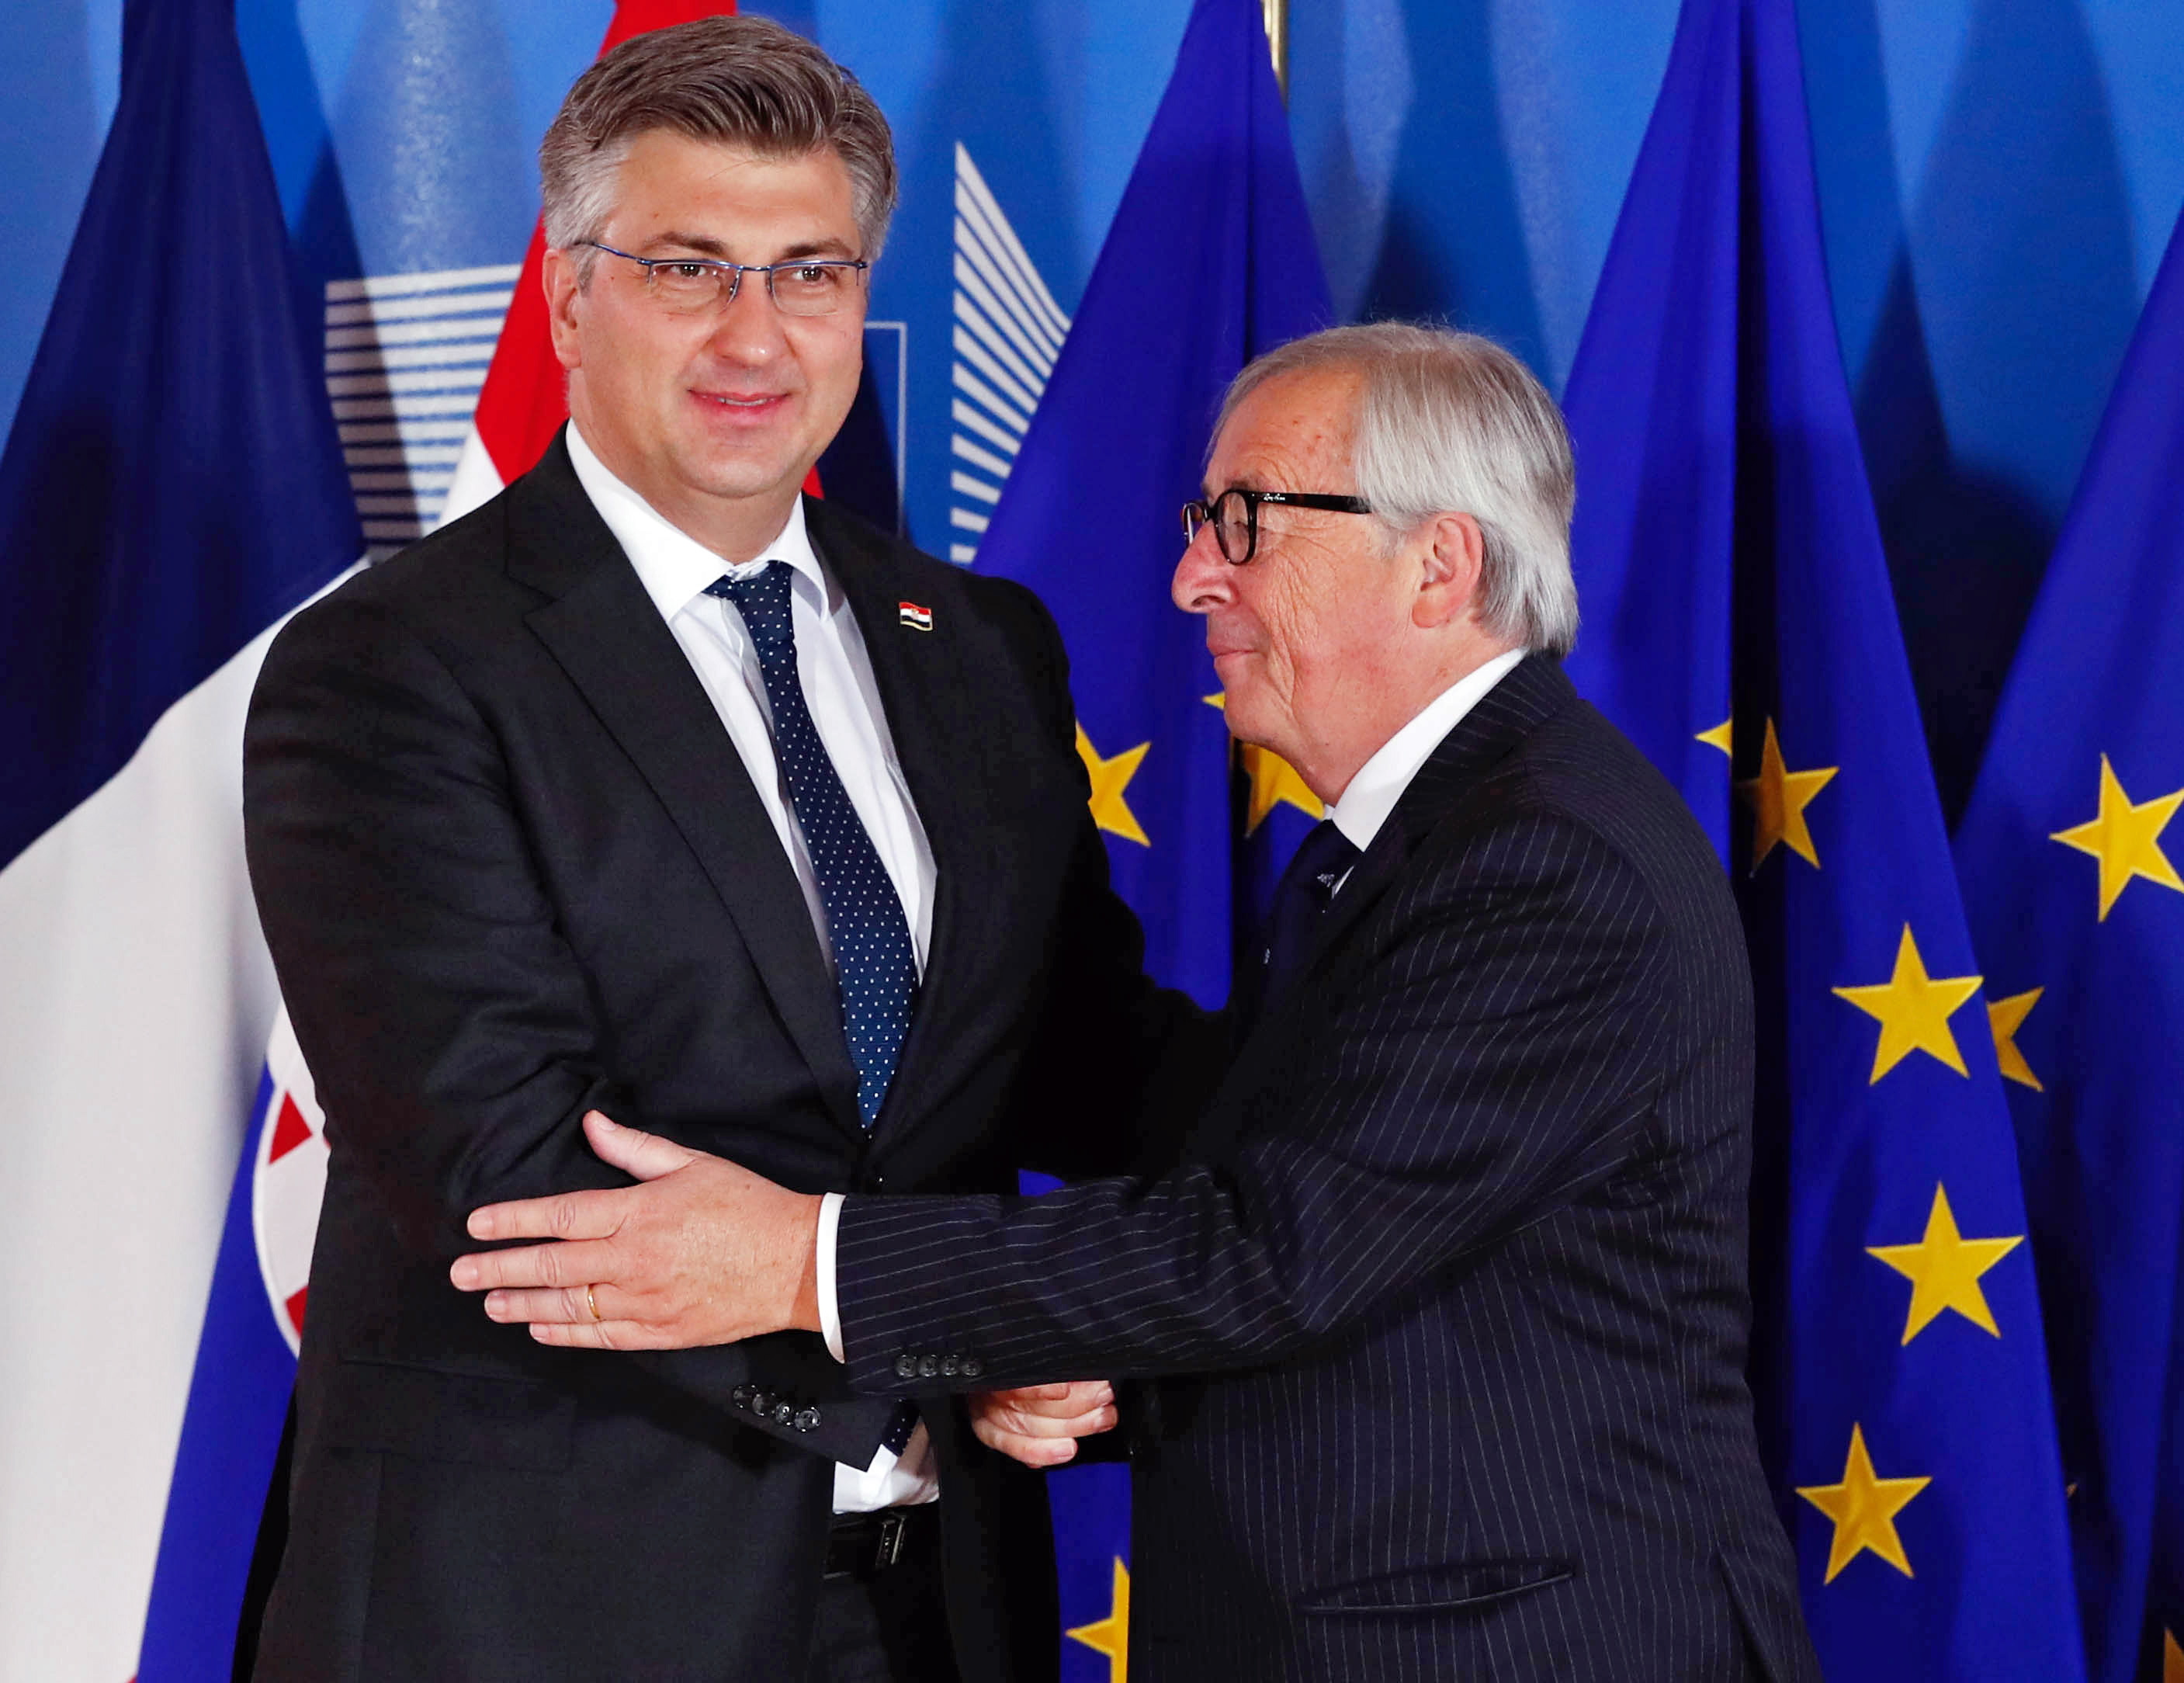 epa06836667 Croatian Prime Minister Andrej Plenkovic i(L) is welcomed by European Commission President Jean-Claude Juncker (R) for an informal meeting on migration and asylum issues in Brussels, Belgium, 24 June 2018. European Commission President Jean-Claude Juncker hosts the gathering ahead of a full summit of all 28 European Union leaders to overhaul the EU asylum system on June 28.  EPA/YVES HERMAN / POOL